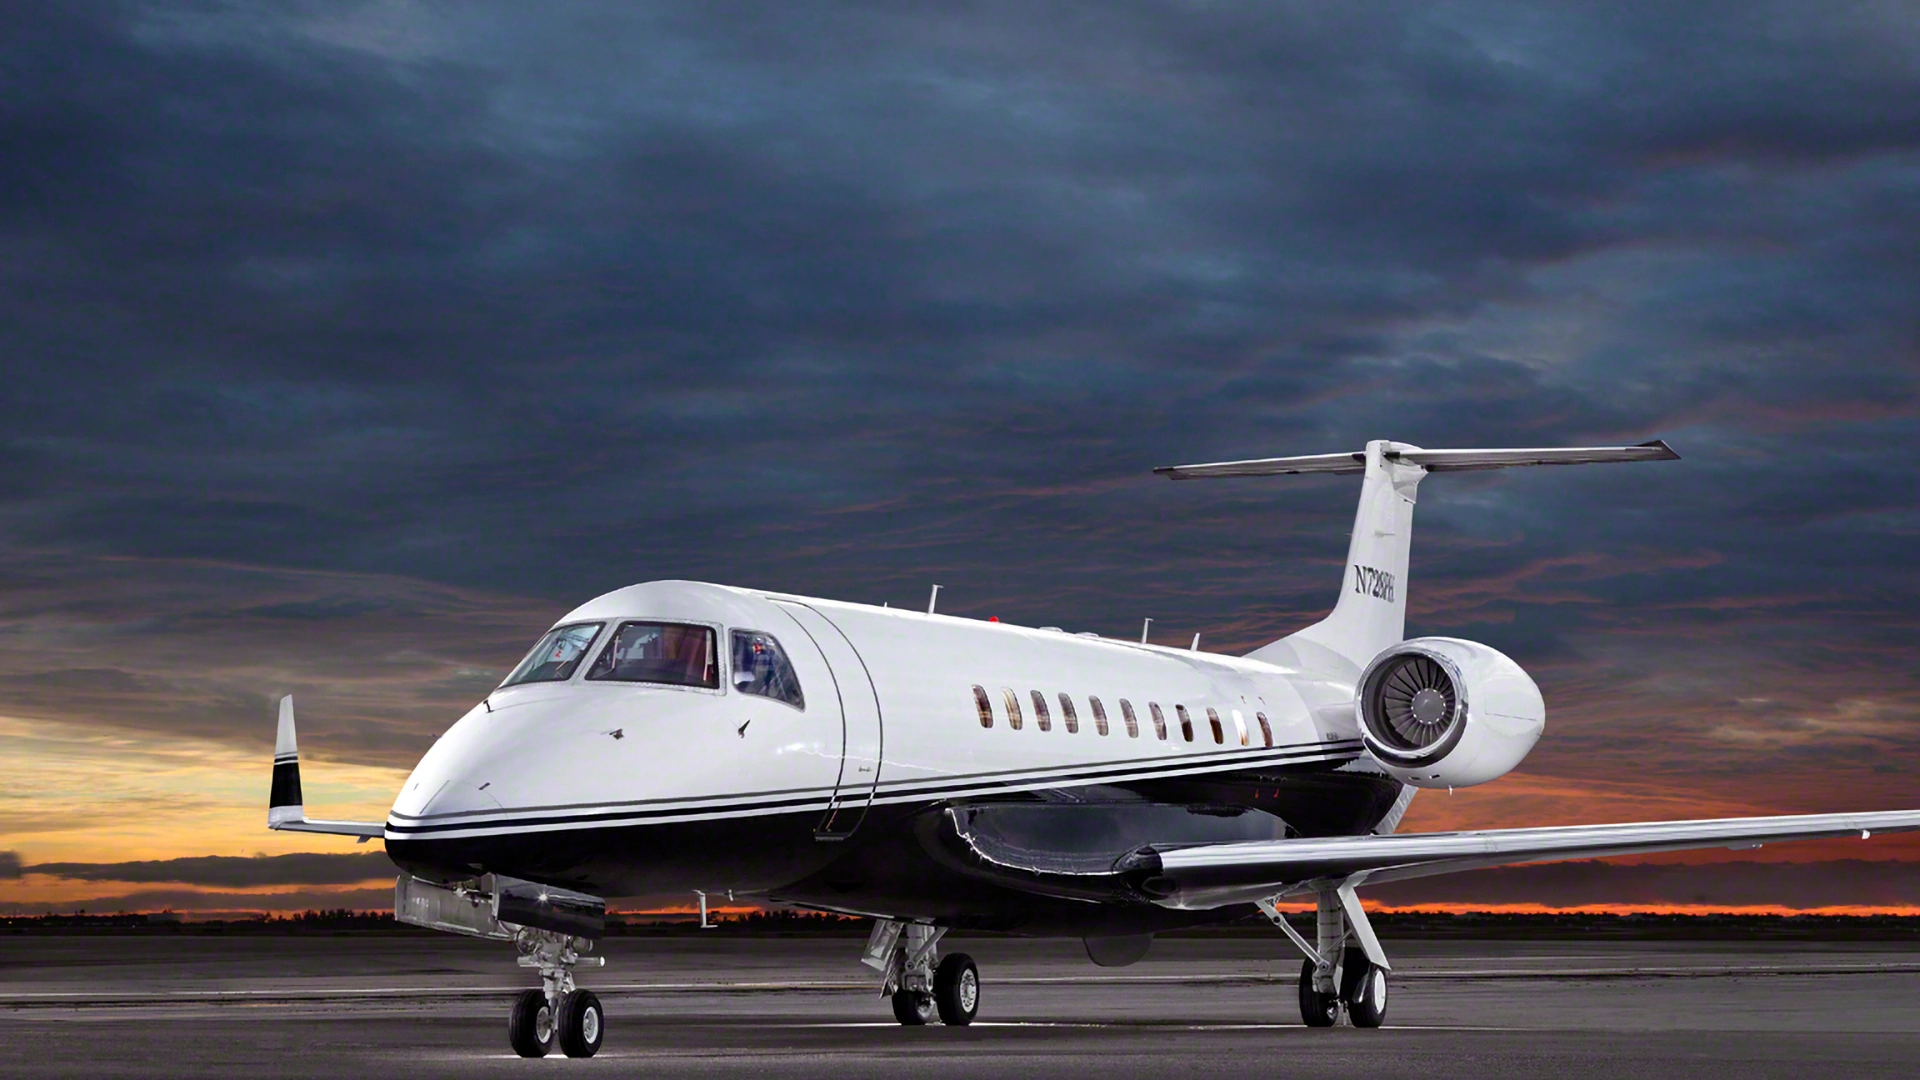 Alerion Embraer Legacy 60 - N728PH available for private charter by Alerion Aviation.